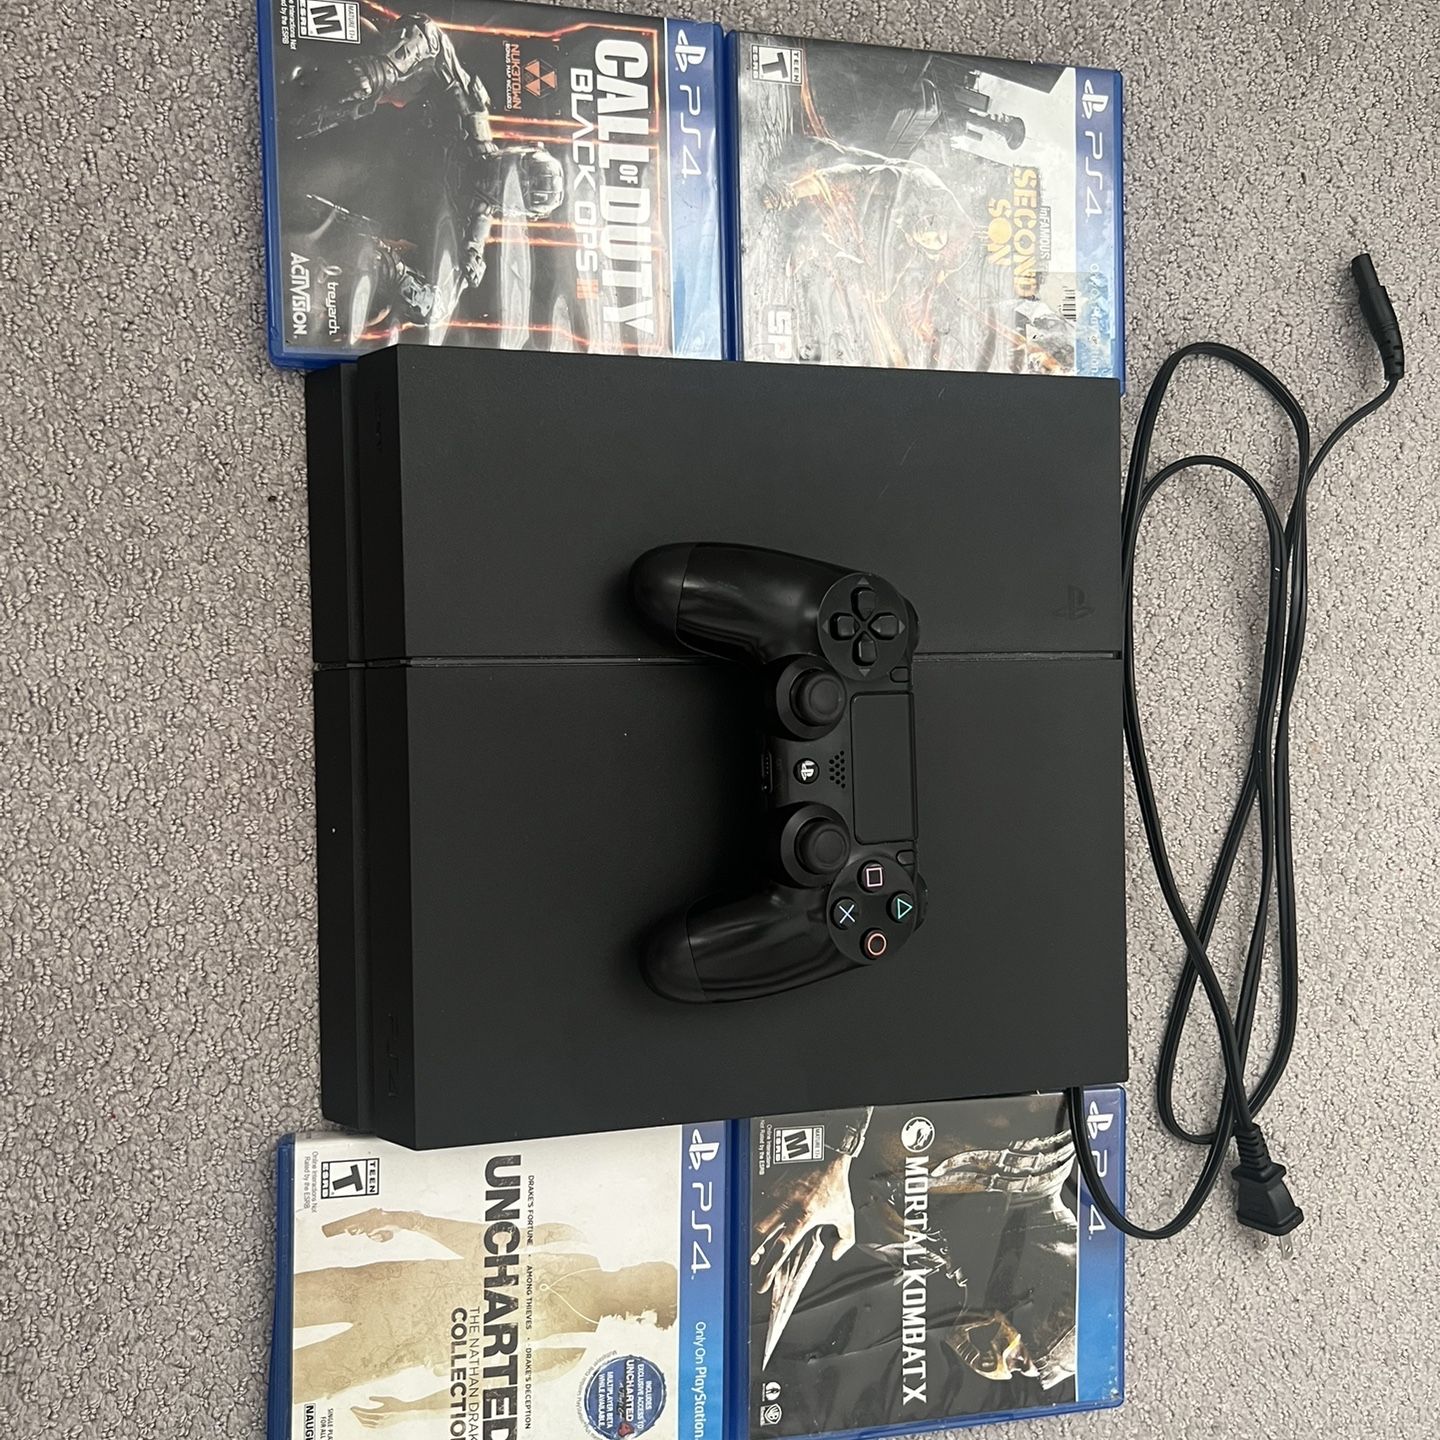 PlayStation 4 With Control And Games